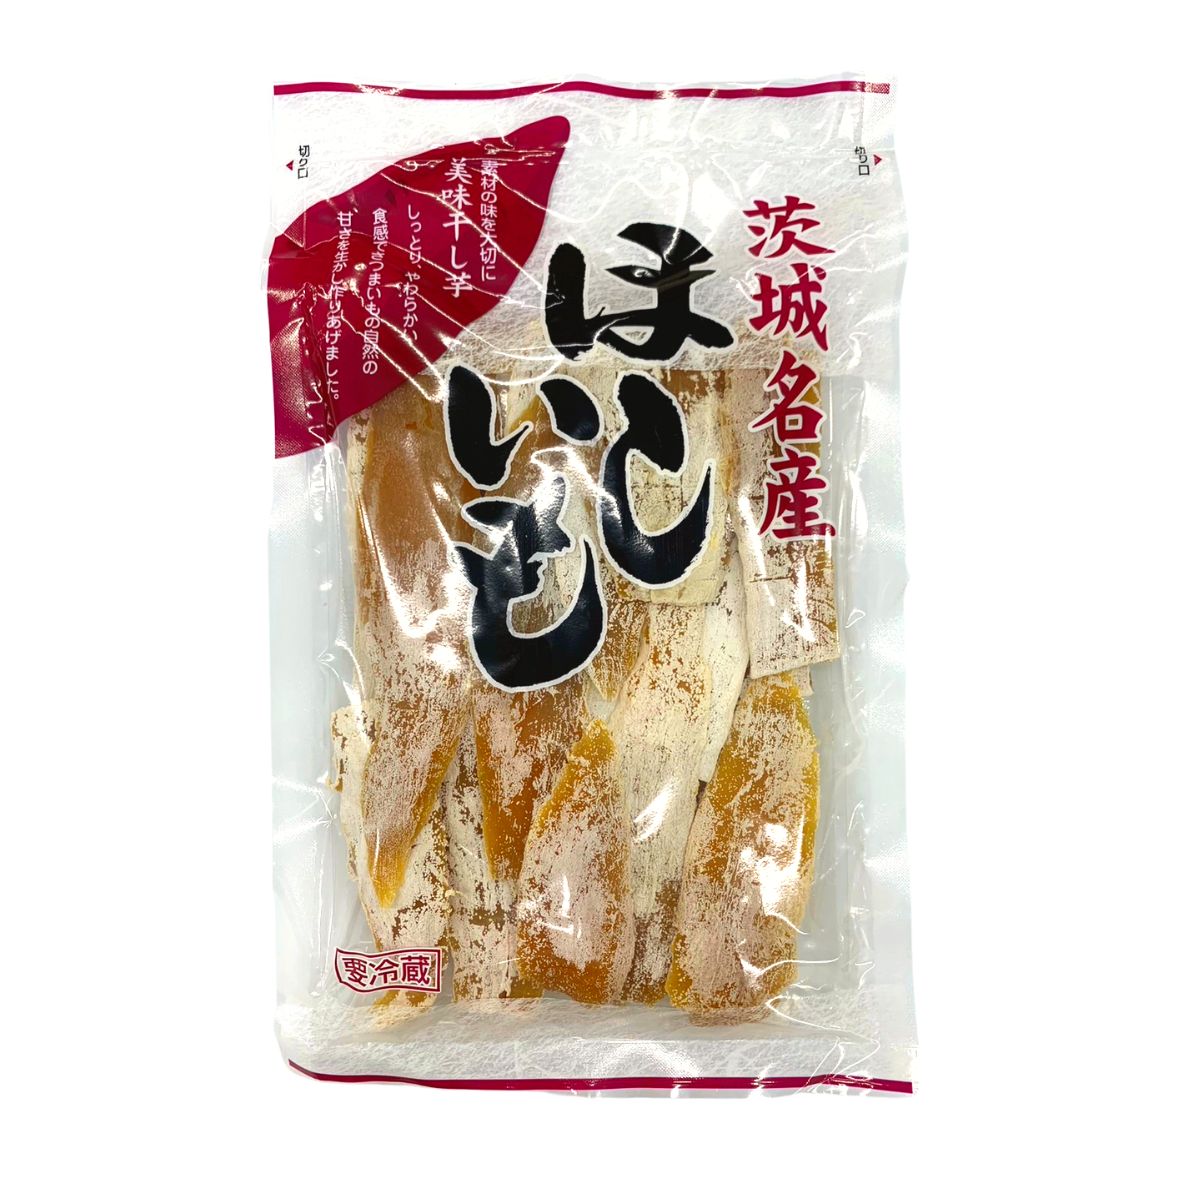  dried sweet potato with translation Ibaraki domestic production no addition . is .. confection sweet potato sweets your order confection Japanese confectionery cut . dropping 300g JW300